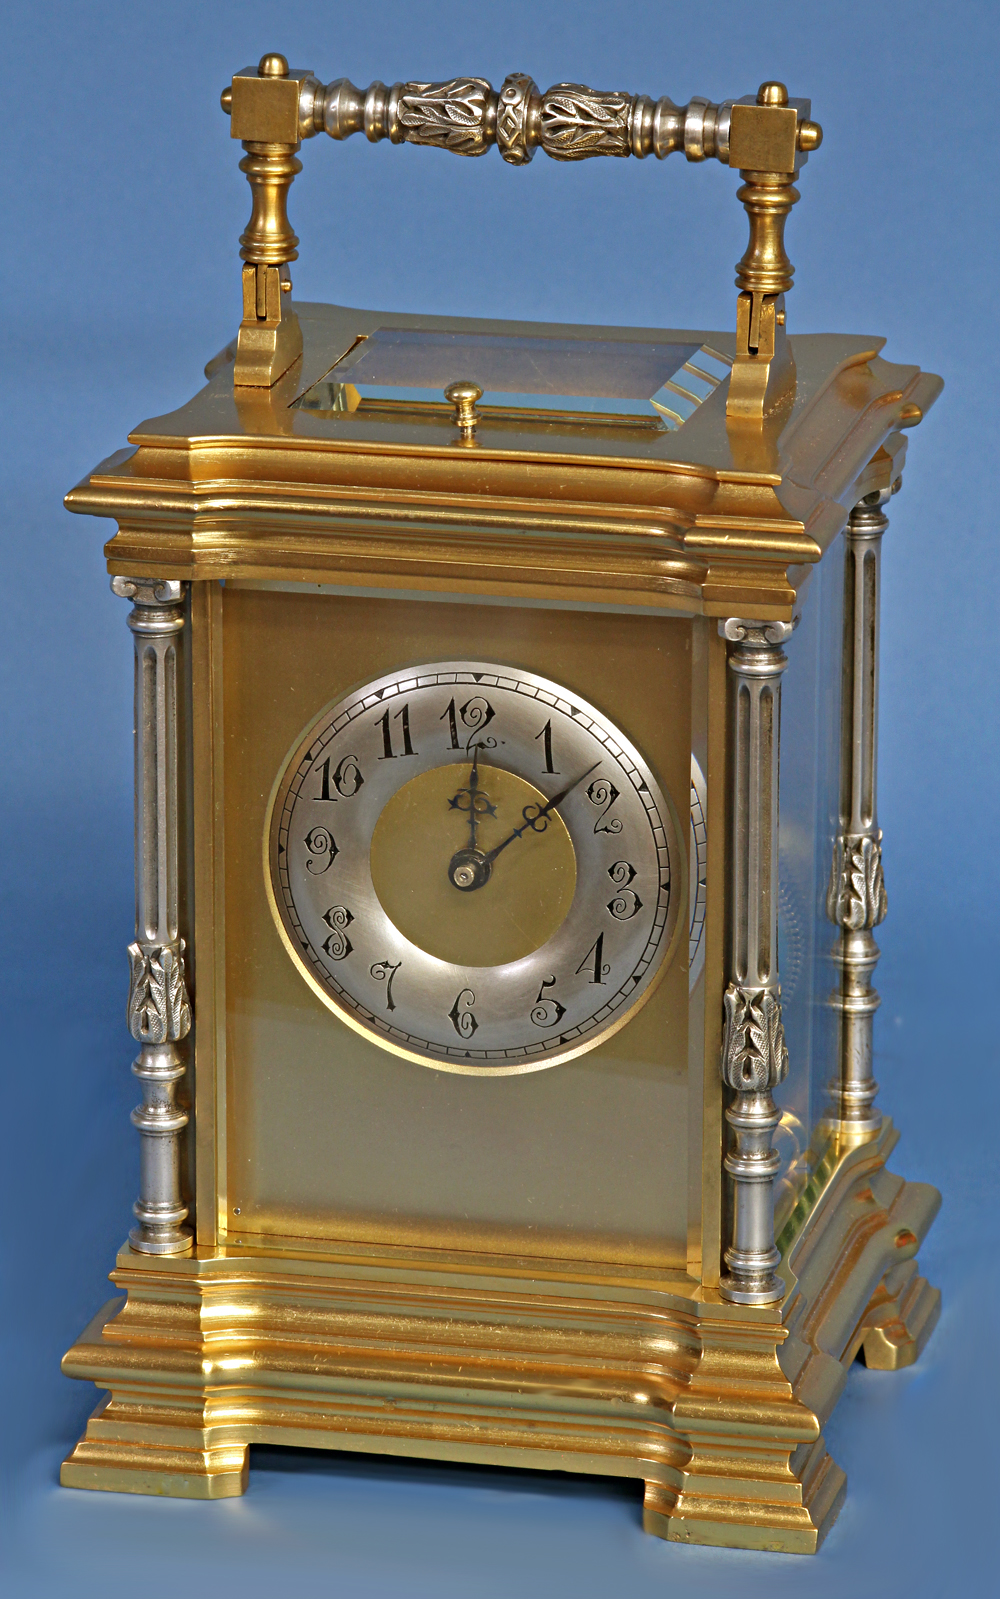 c.1885 Petite-Sonnerie Carriage Clock by Tiffany Makers.